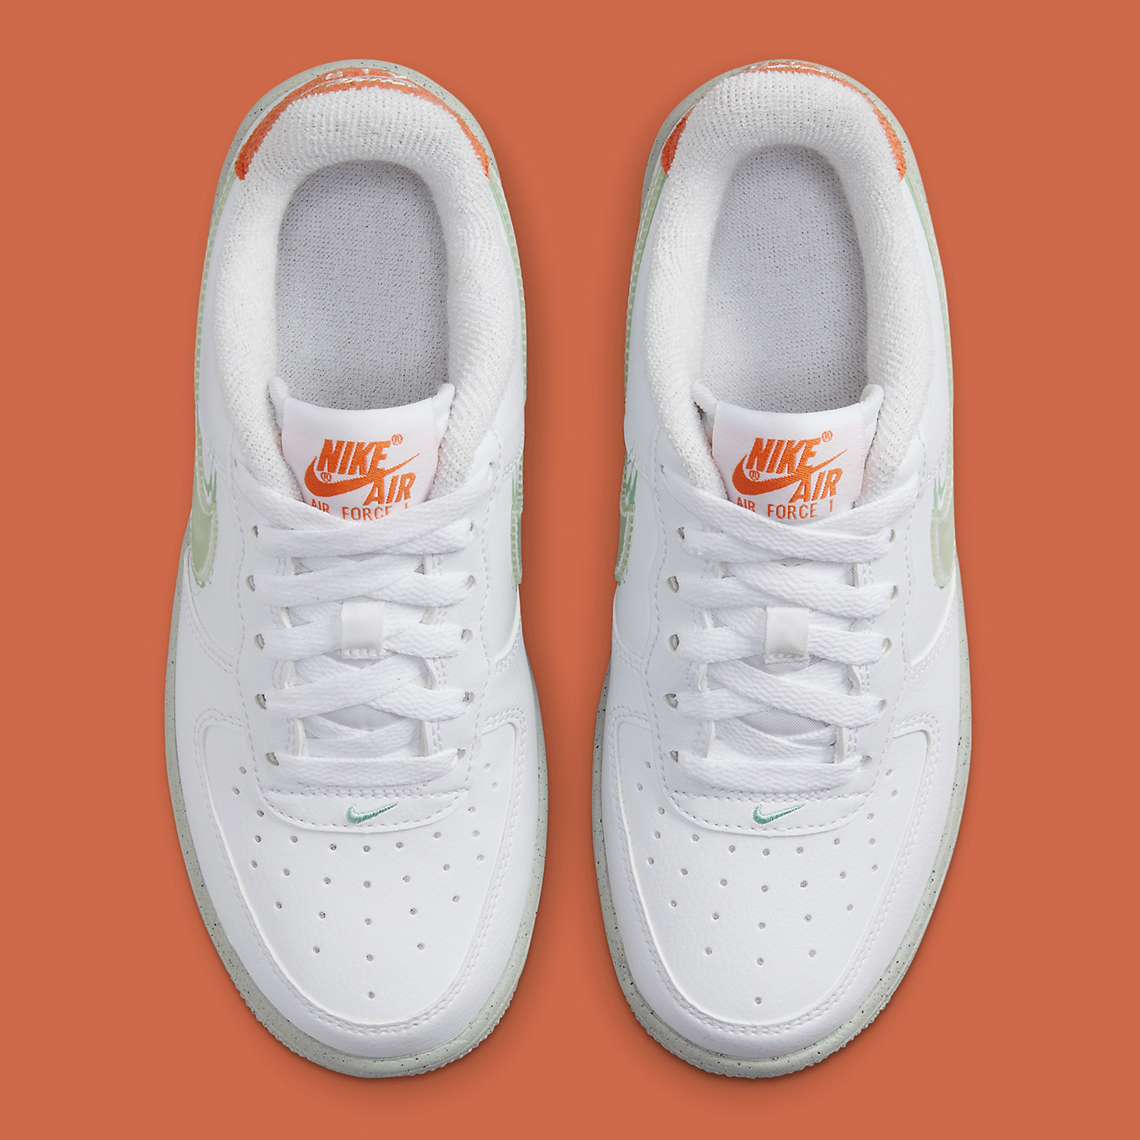 Nike india Air Force 1 DX3067 100 3 1